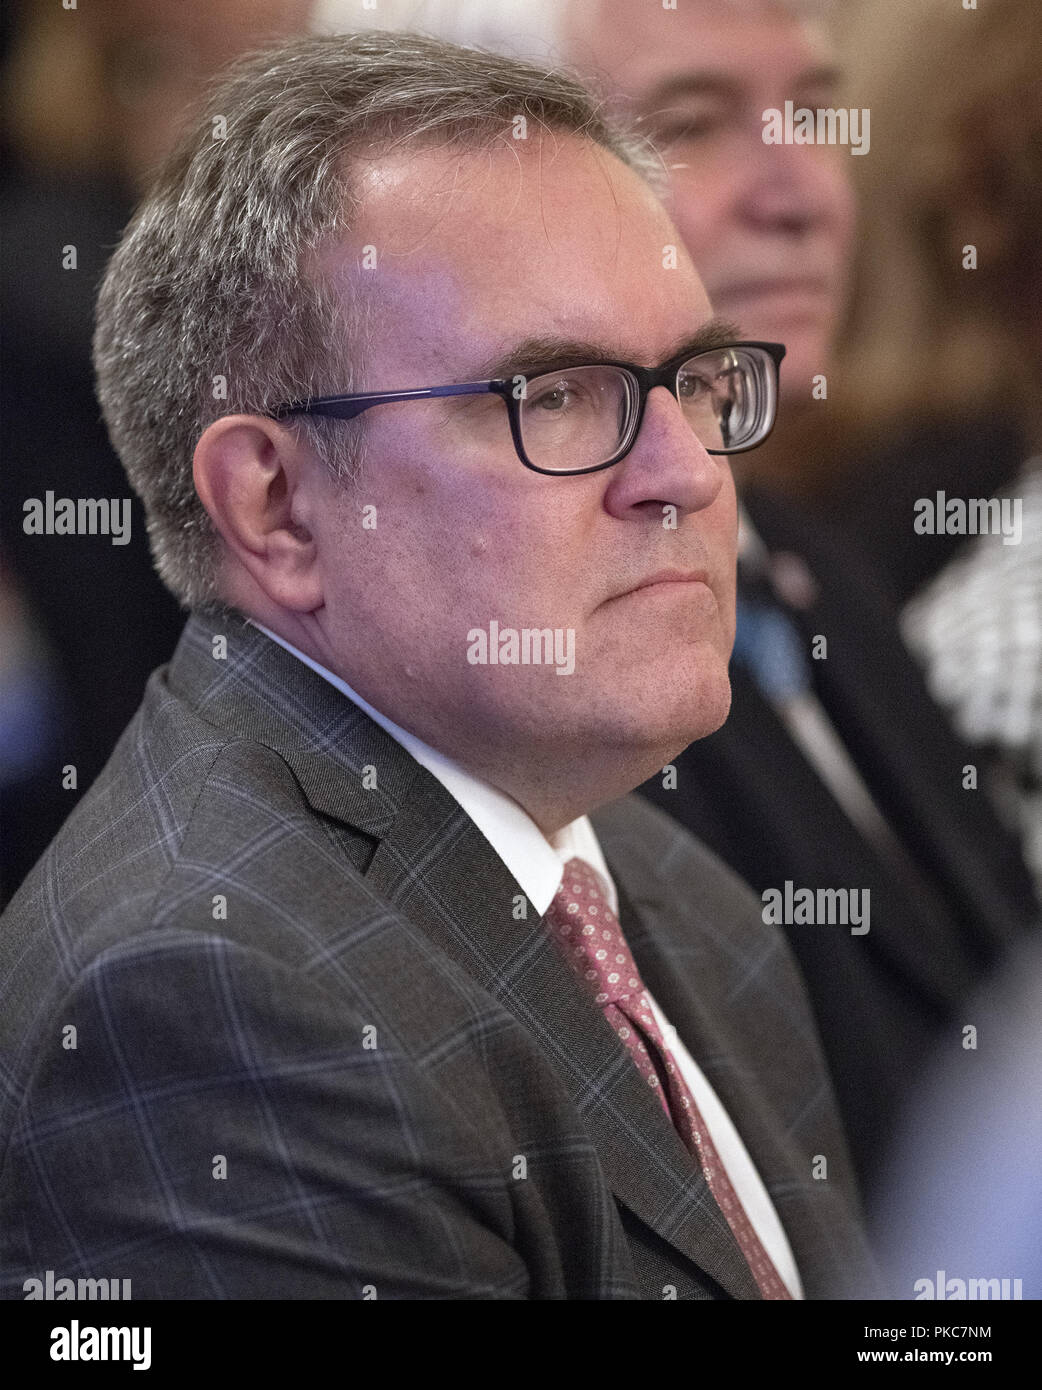 Washington, District of Columbia, USA. 12th Sep, 2018. Acting Environmental Protection Agency Administrator Andrew Wheeler listens as United States President Donald J. Trump makes remarks at the Congressional Medal of Honor Society Reception in the East Room of the White House in Washington, DC on Wednesday, September 12, 2018 Credit: Ron Sachs/CNP/ZUMA Wire/Alamy Live News Stock Photo